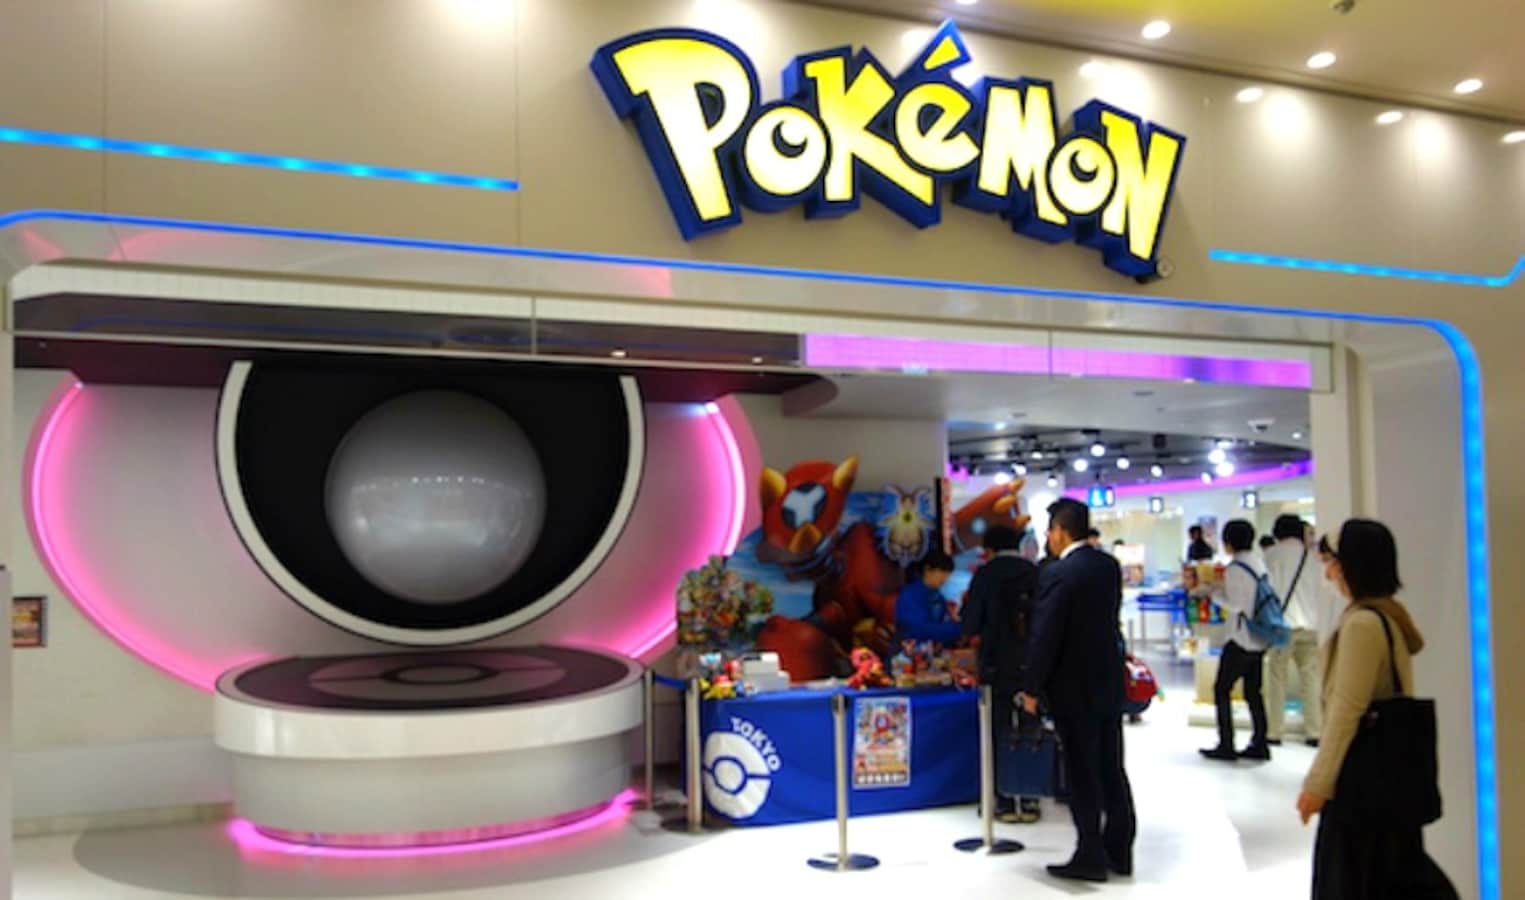 10 Things To Buy At This Tokyo Pokemon Center All About Japan